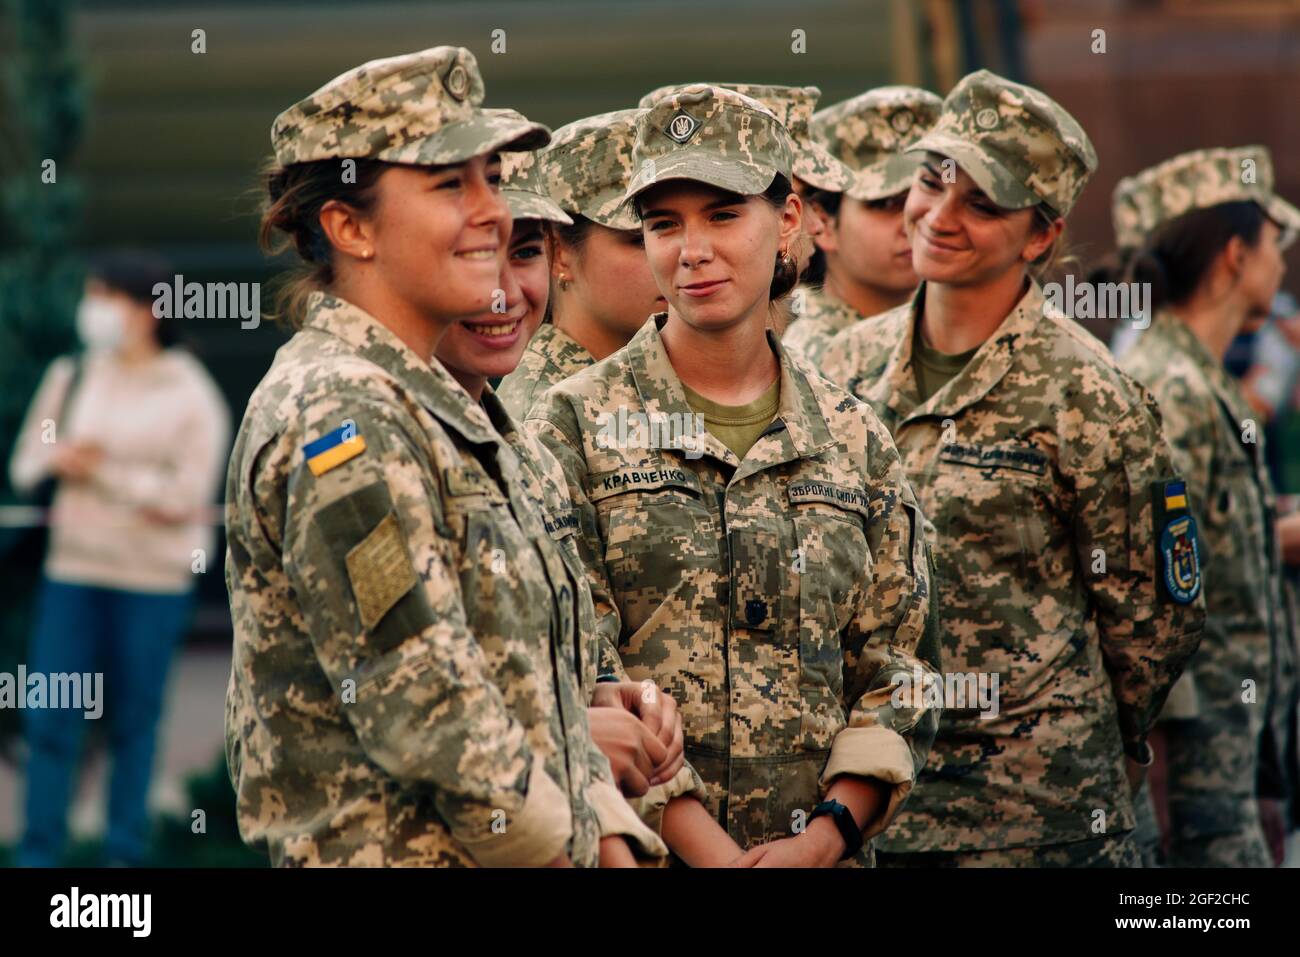 Kyiv, Ukraine - August 20, 2021: Rehearsal of the military parade on occasion of 30 years Independence Day of Ukraine. Young smiling women Stock Photo